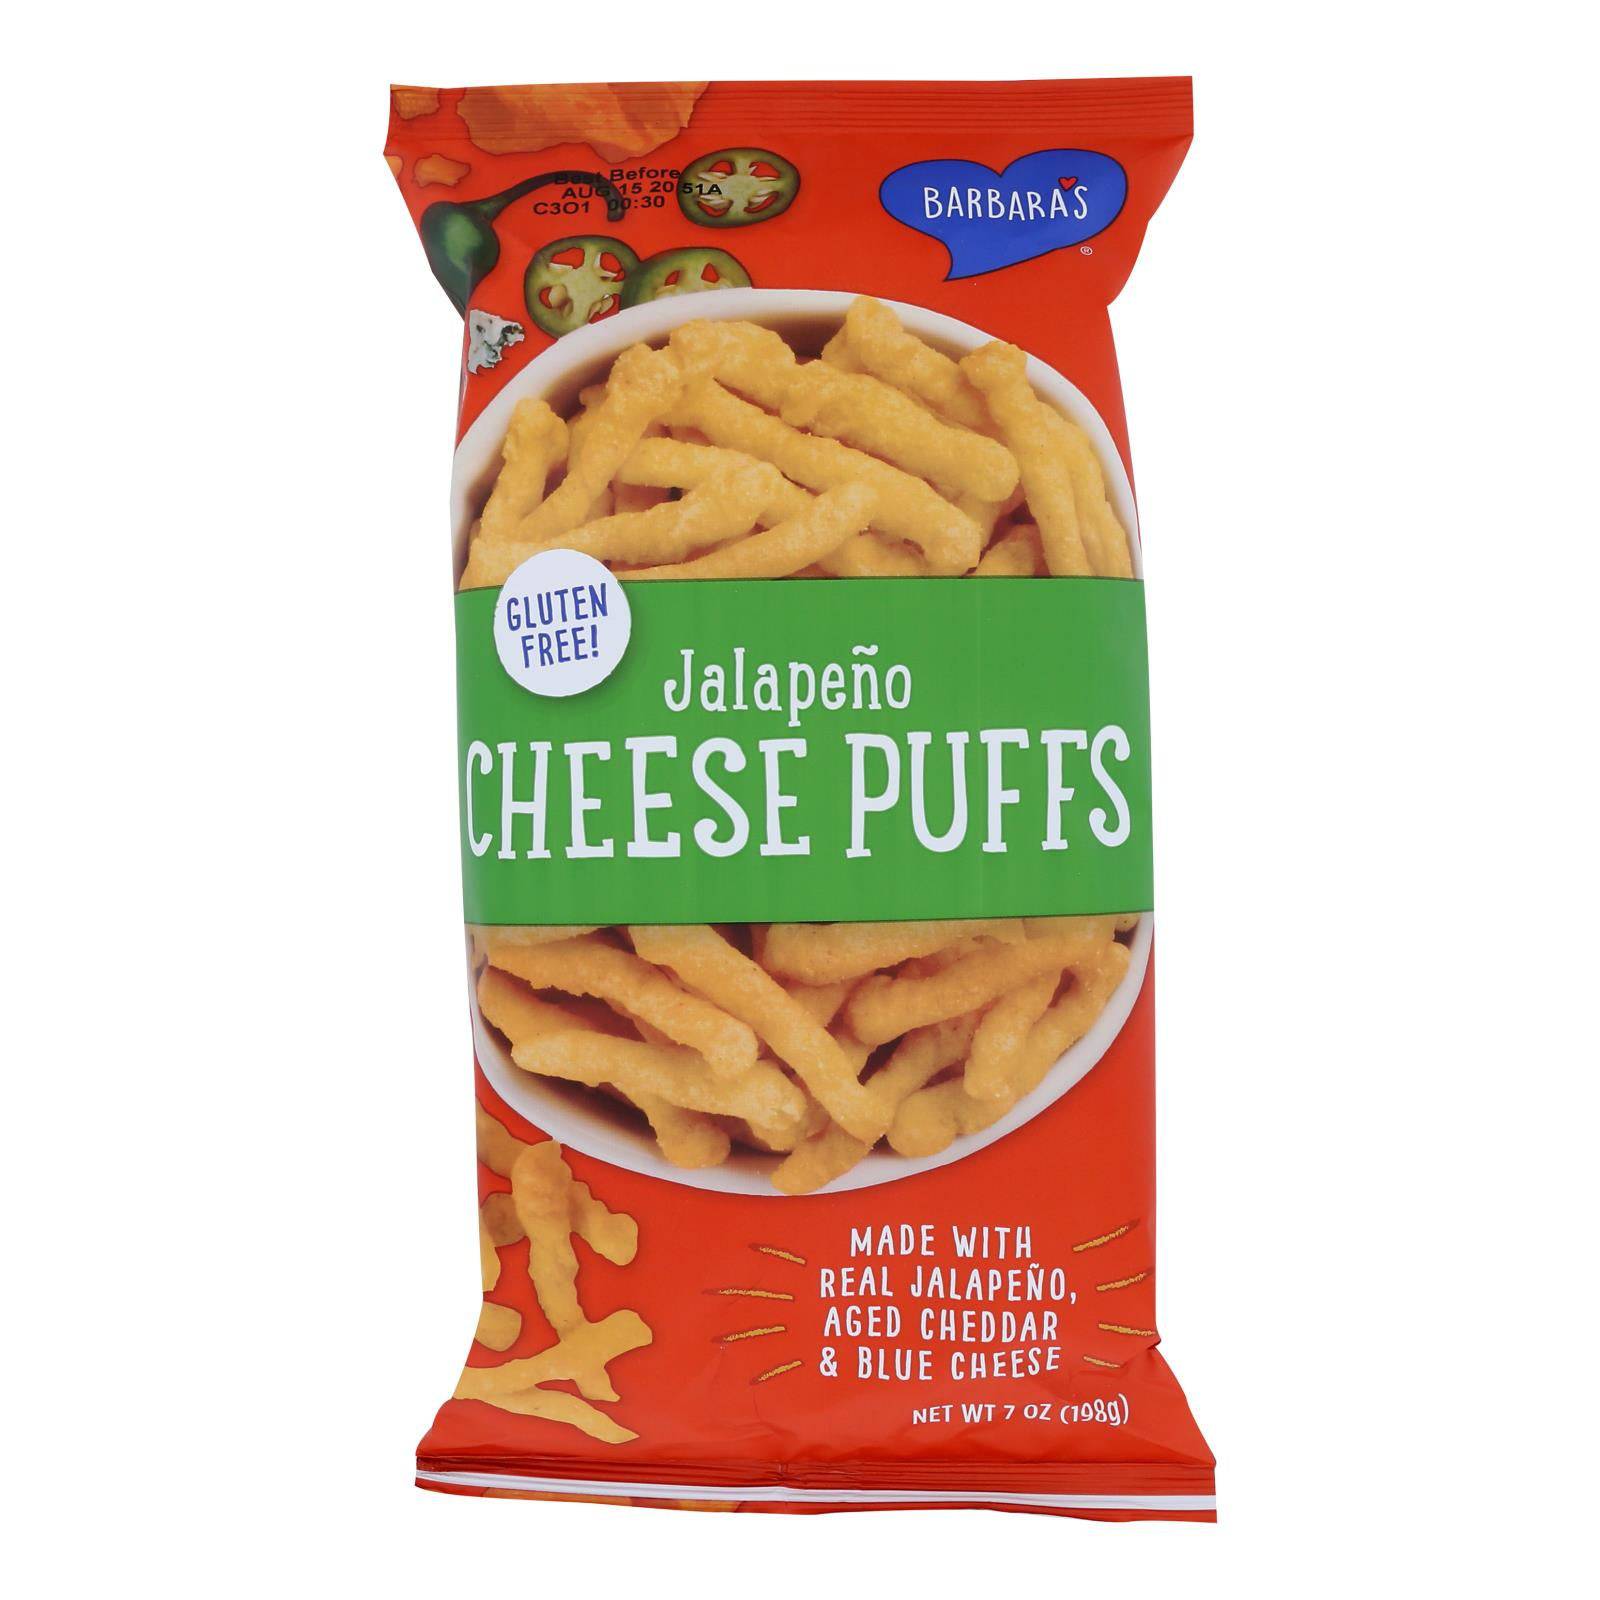 Buy Barbara's Bakery - Cheese Puffs - Jalapeno - Case Of 12 - 7 Oz.  at OnlyNaturals.us